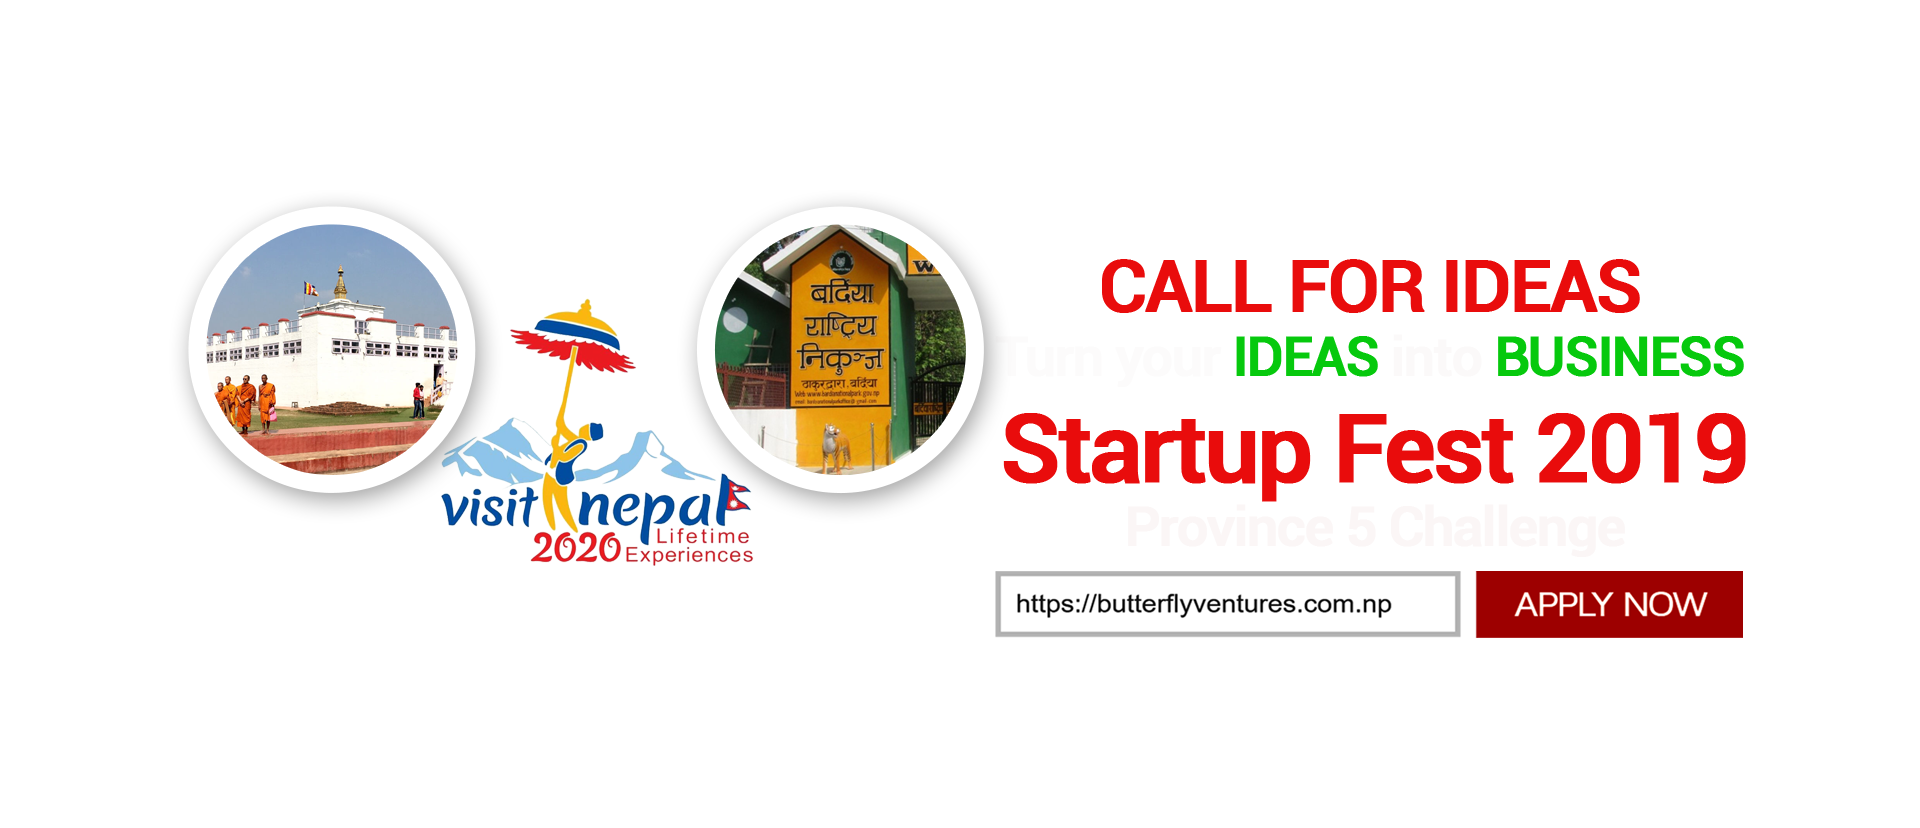 CALL FOR IDEAS : STARTUP FEST 2019 PROVINCE 5